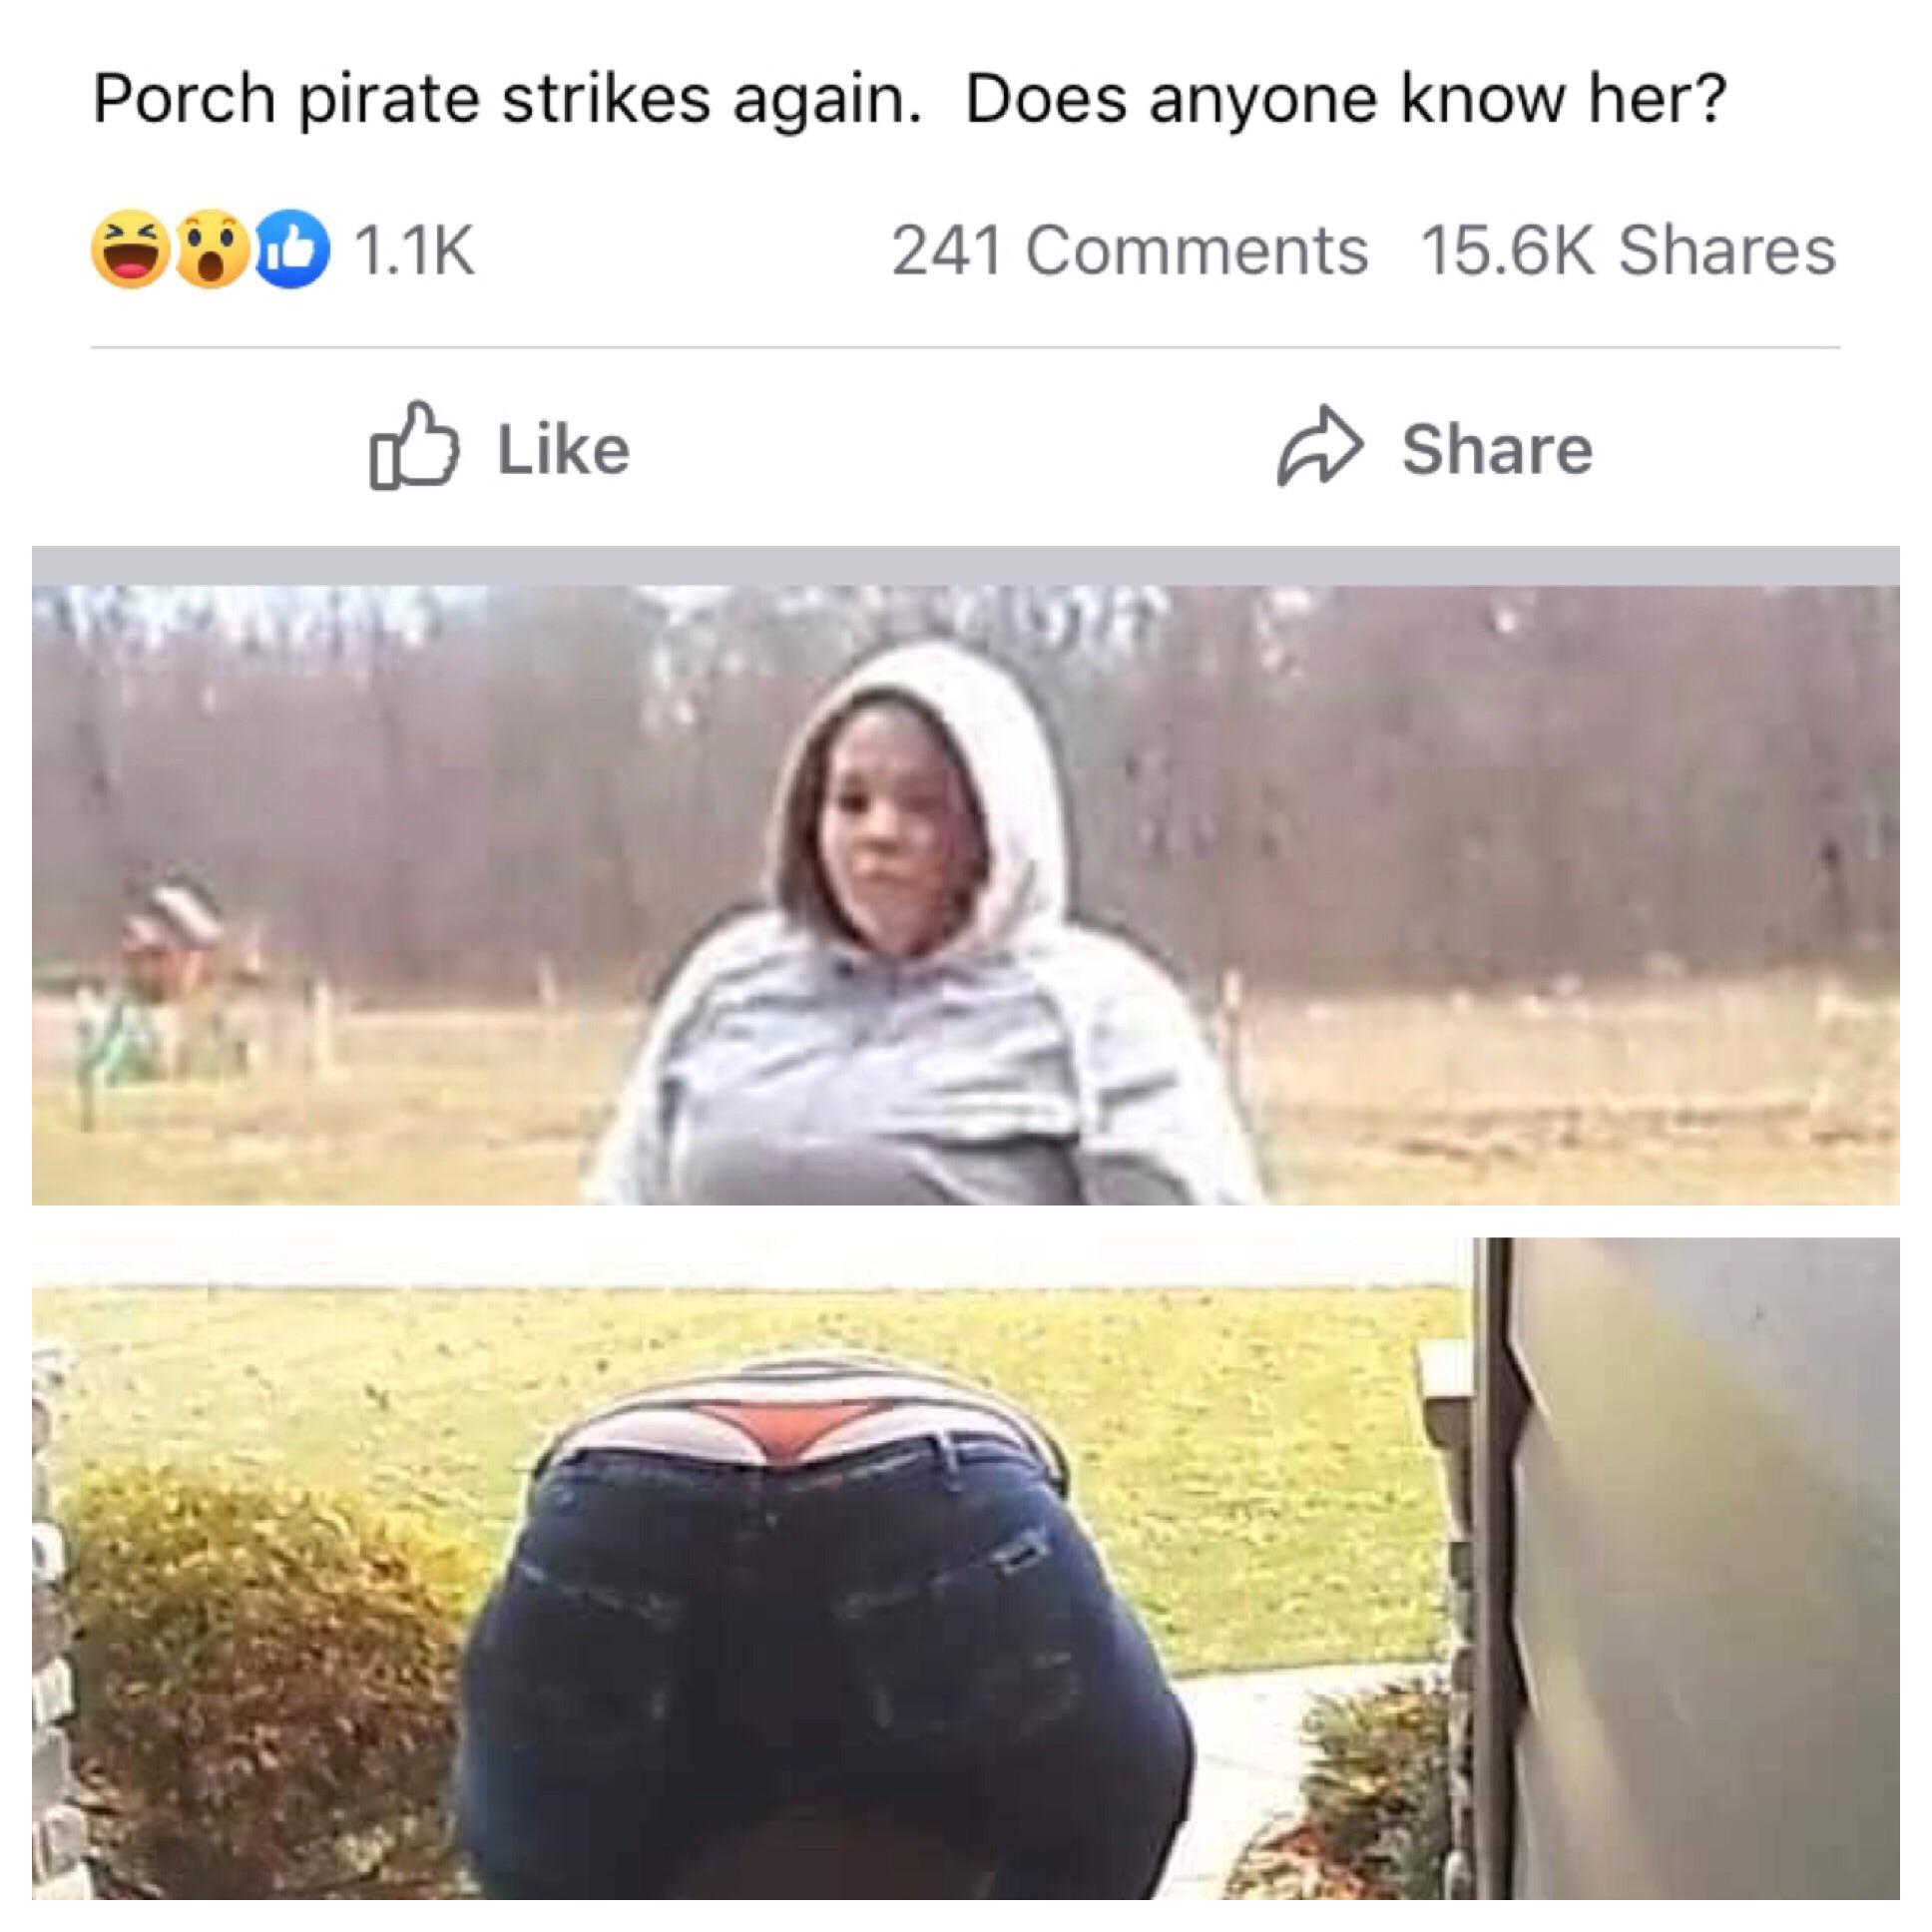 photo caption - Porch pirate strikes again. Does anyone know her? Od 241